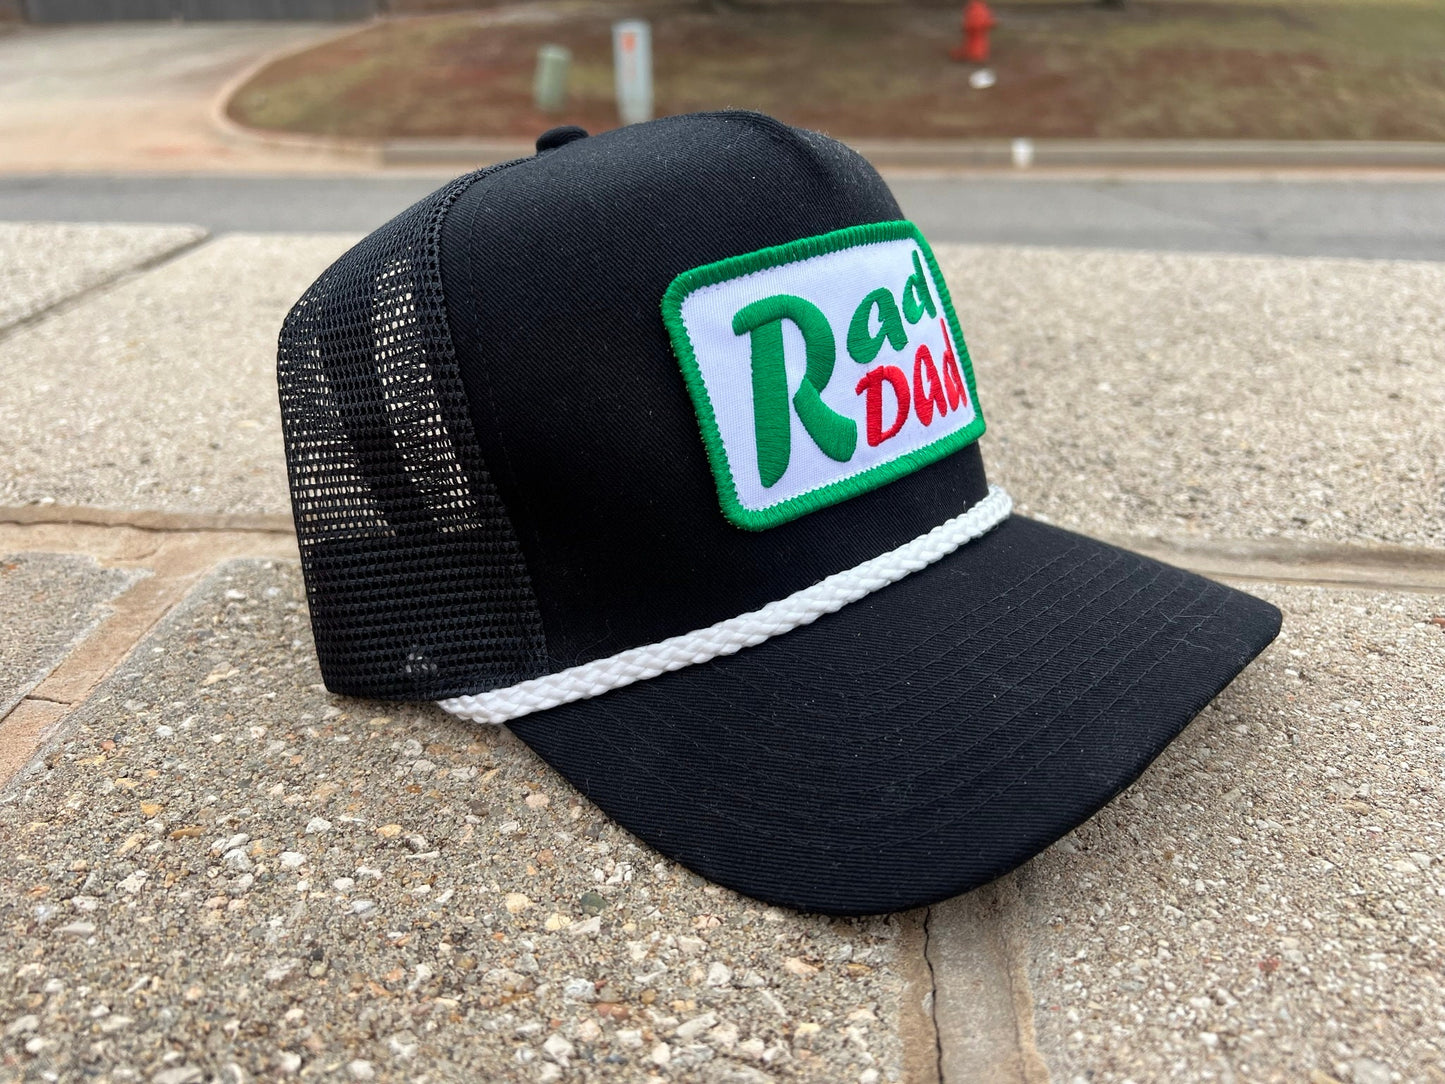 Vintage Style RAD DAD Soda Patch Rope Trucker Snapback Hat Mountain Dew Inspired Logo, Distressed Washed Look, Retro Style, Fathers Day Gift